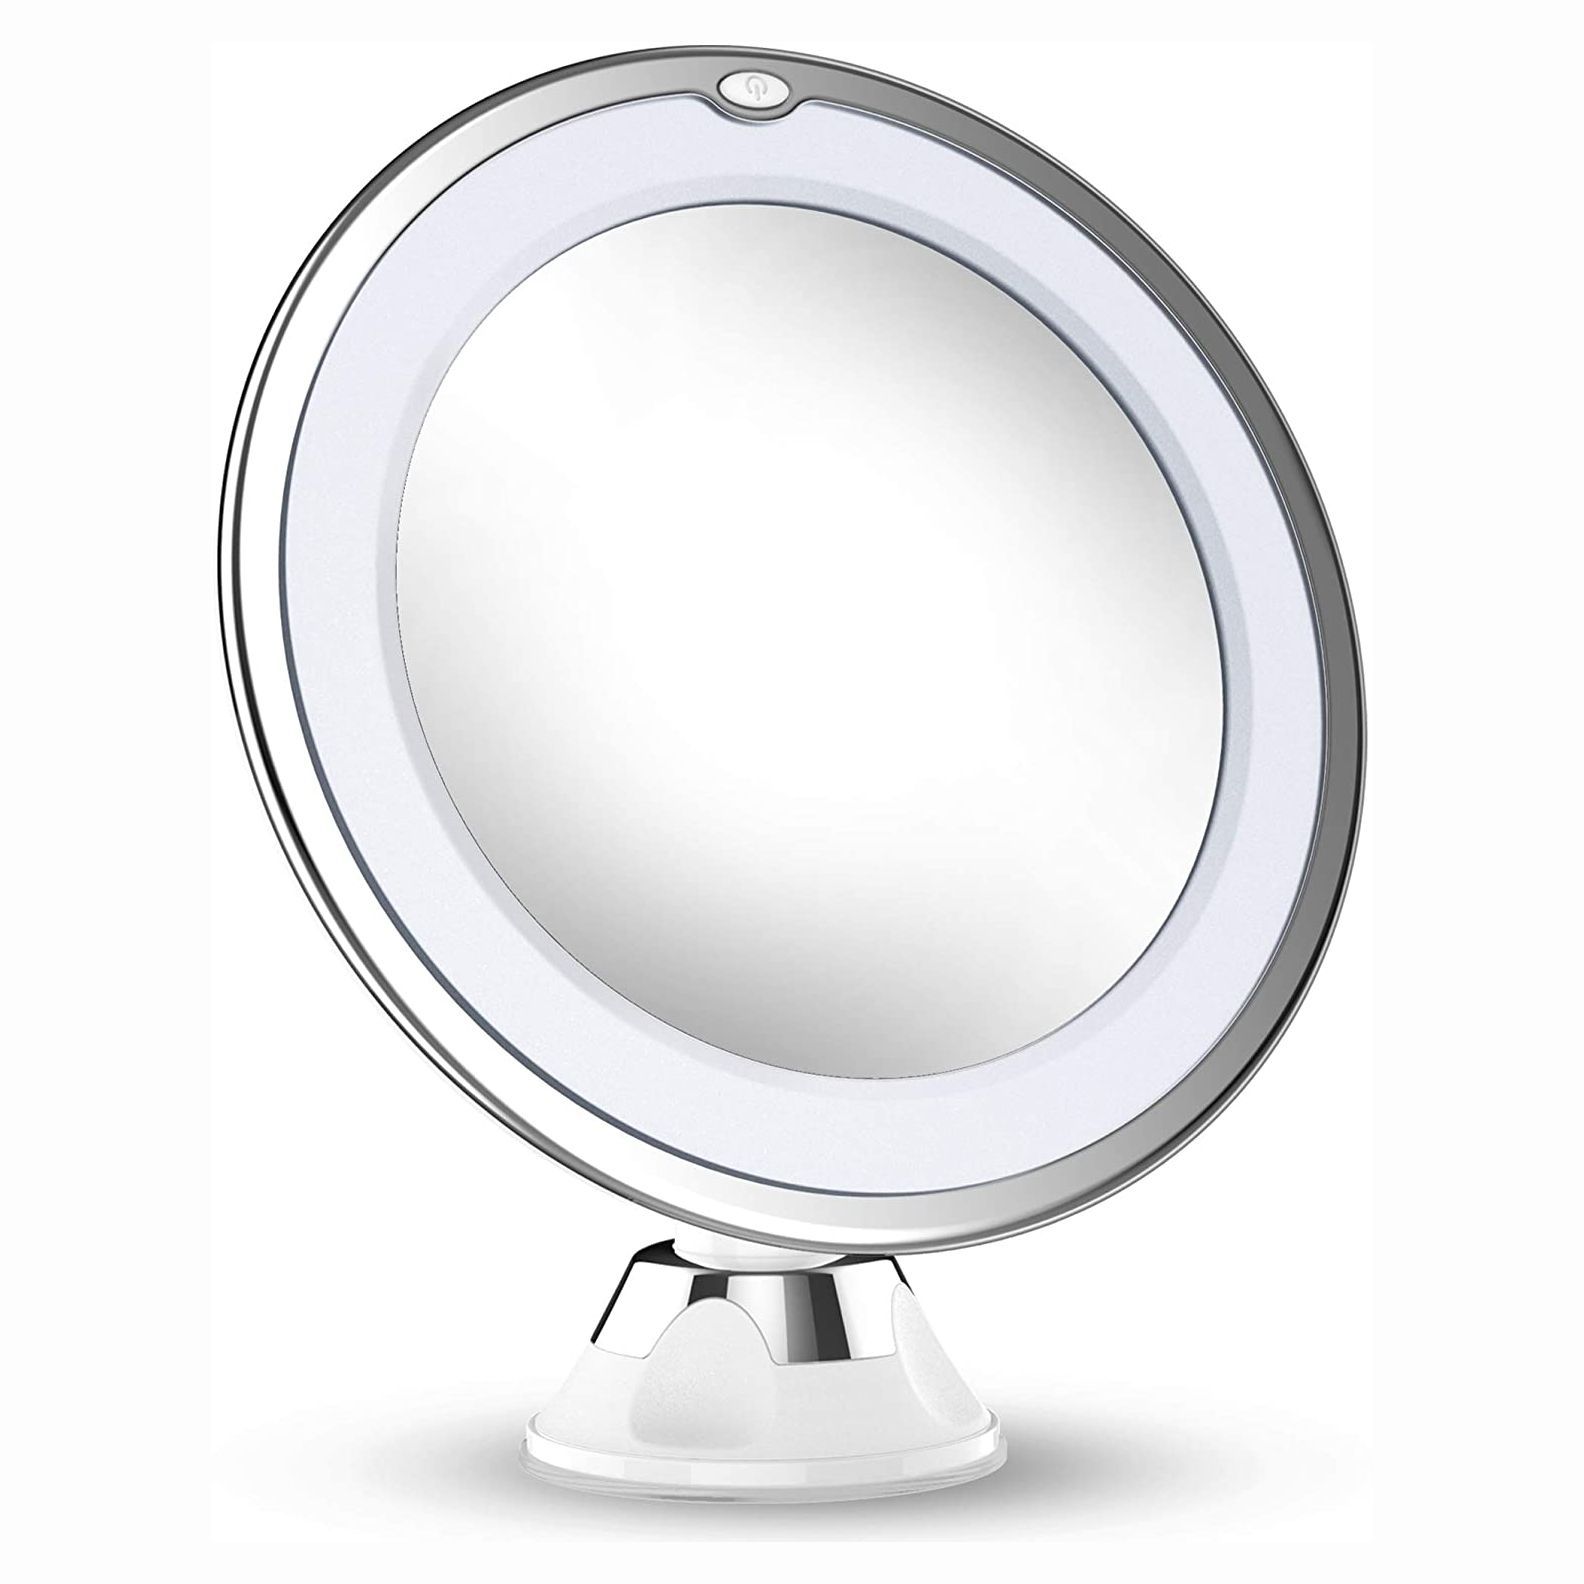 12 Best Makeup Mirrors Of 2020 Vanity Makeup Mirrors With Lights